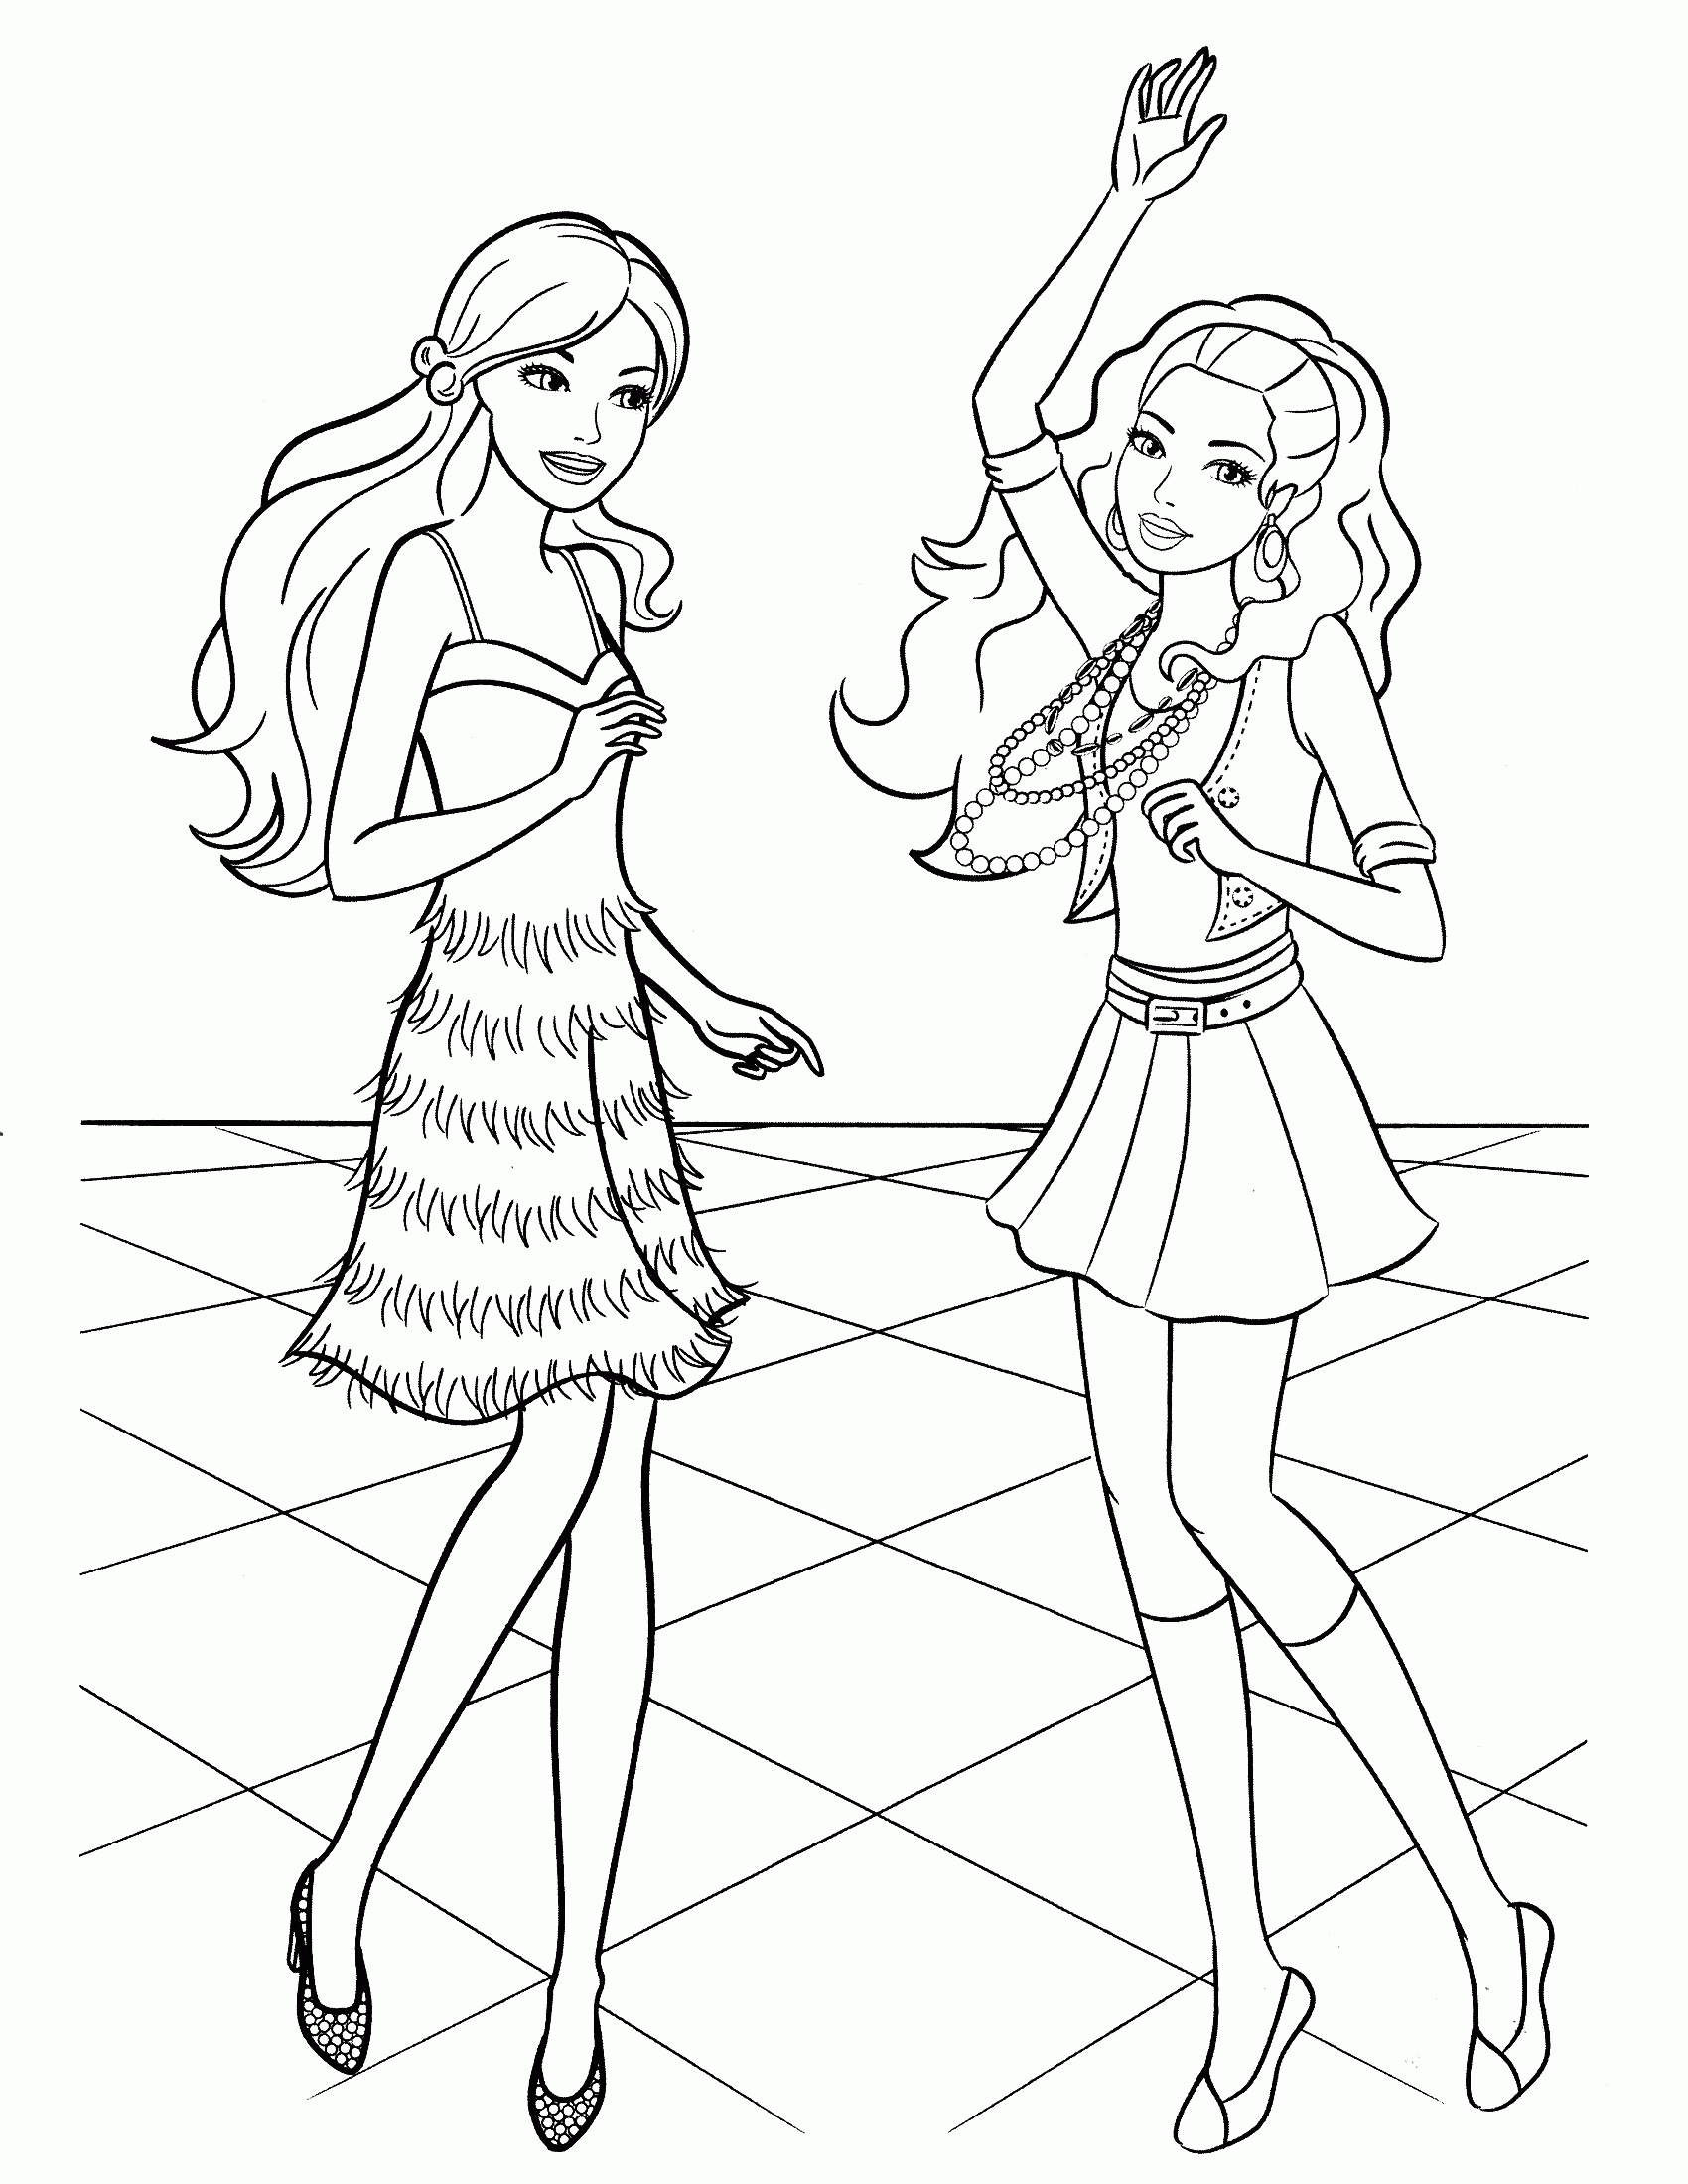 Boy Barbie Coloring Pages For Girls - Coloring Pages For All Ages